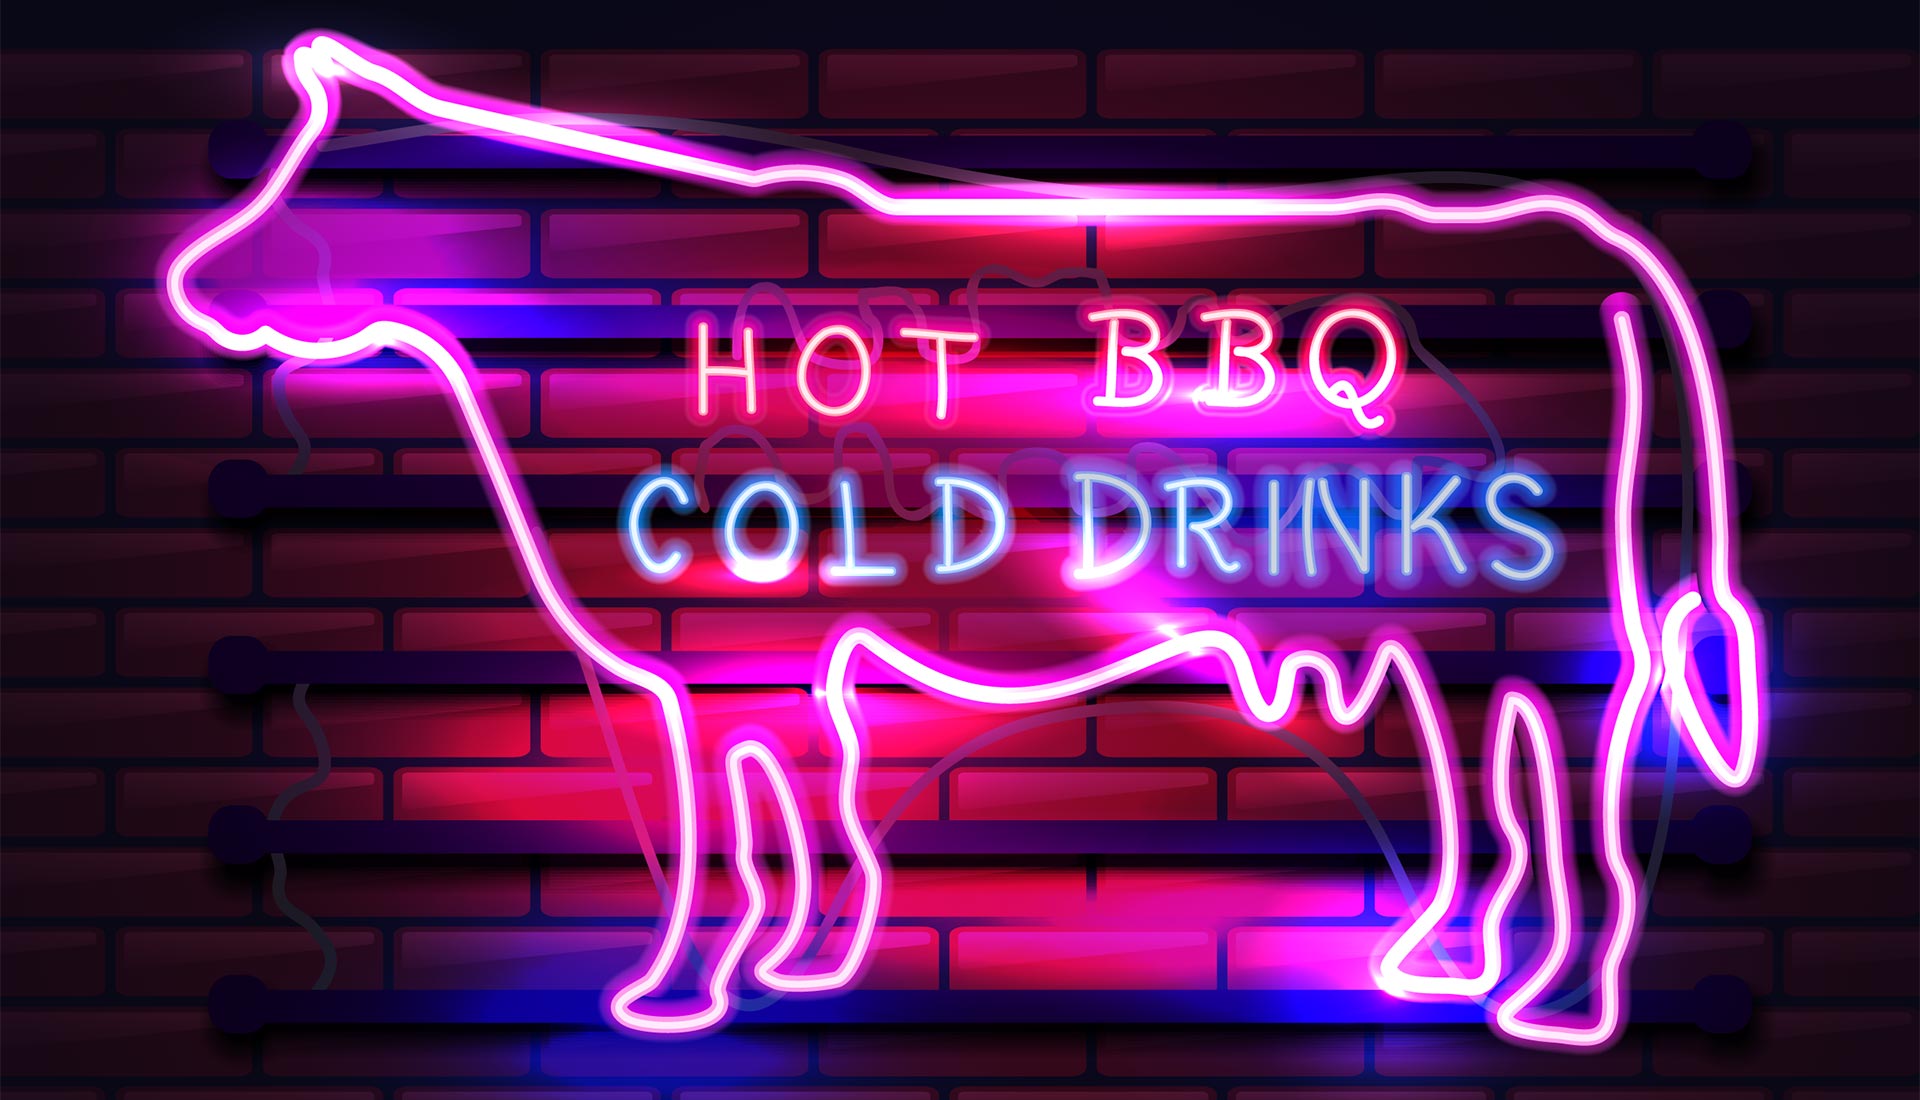 Junggesellenabschied Hot BBQ Cold Drinks